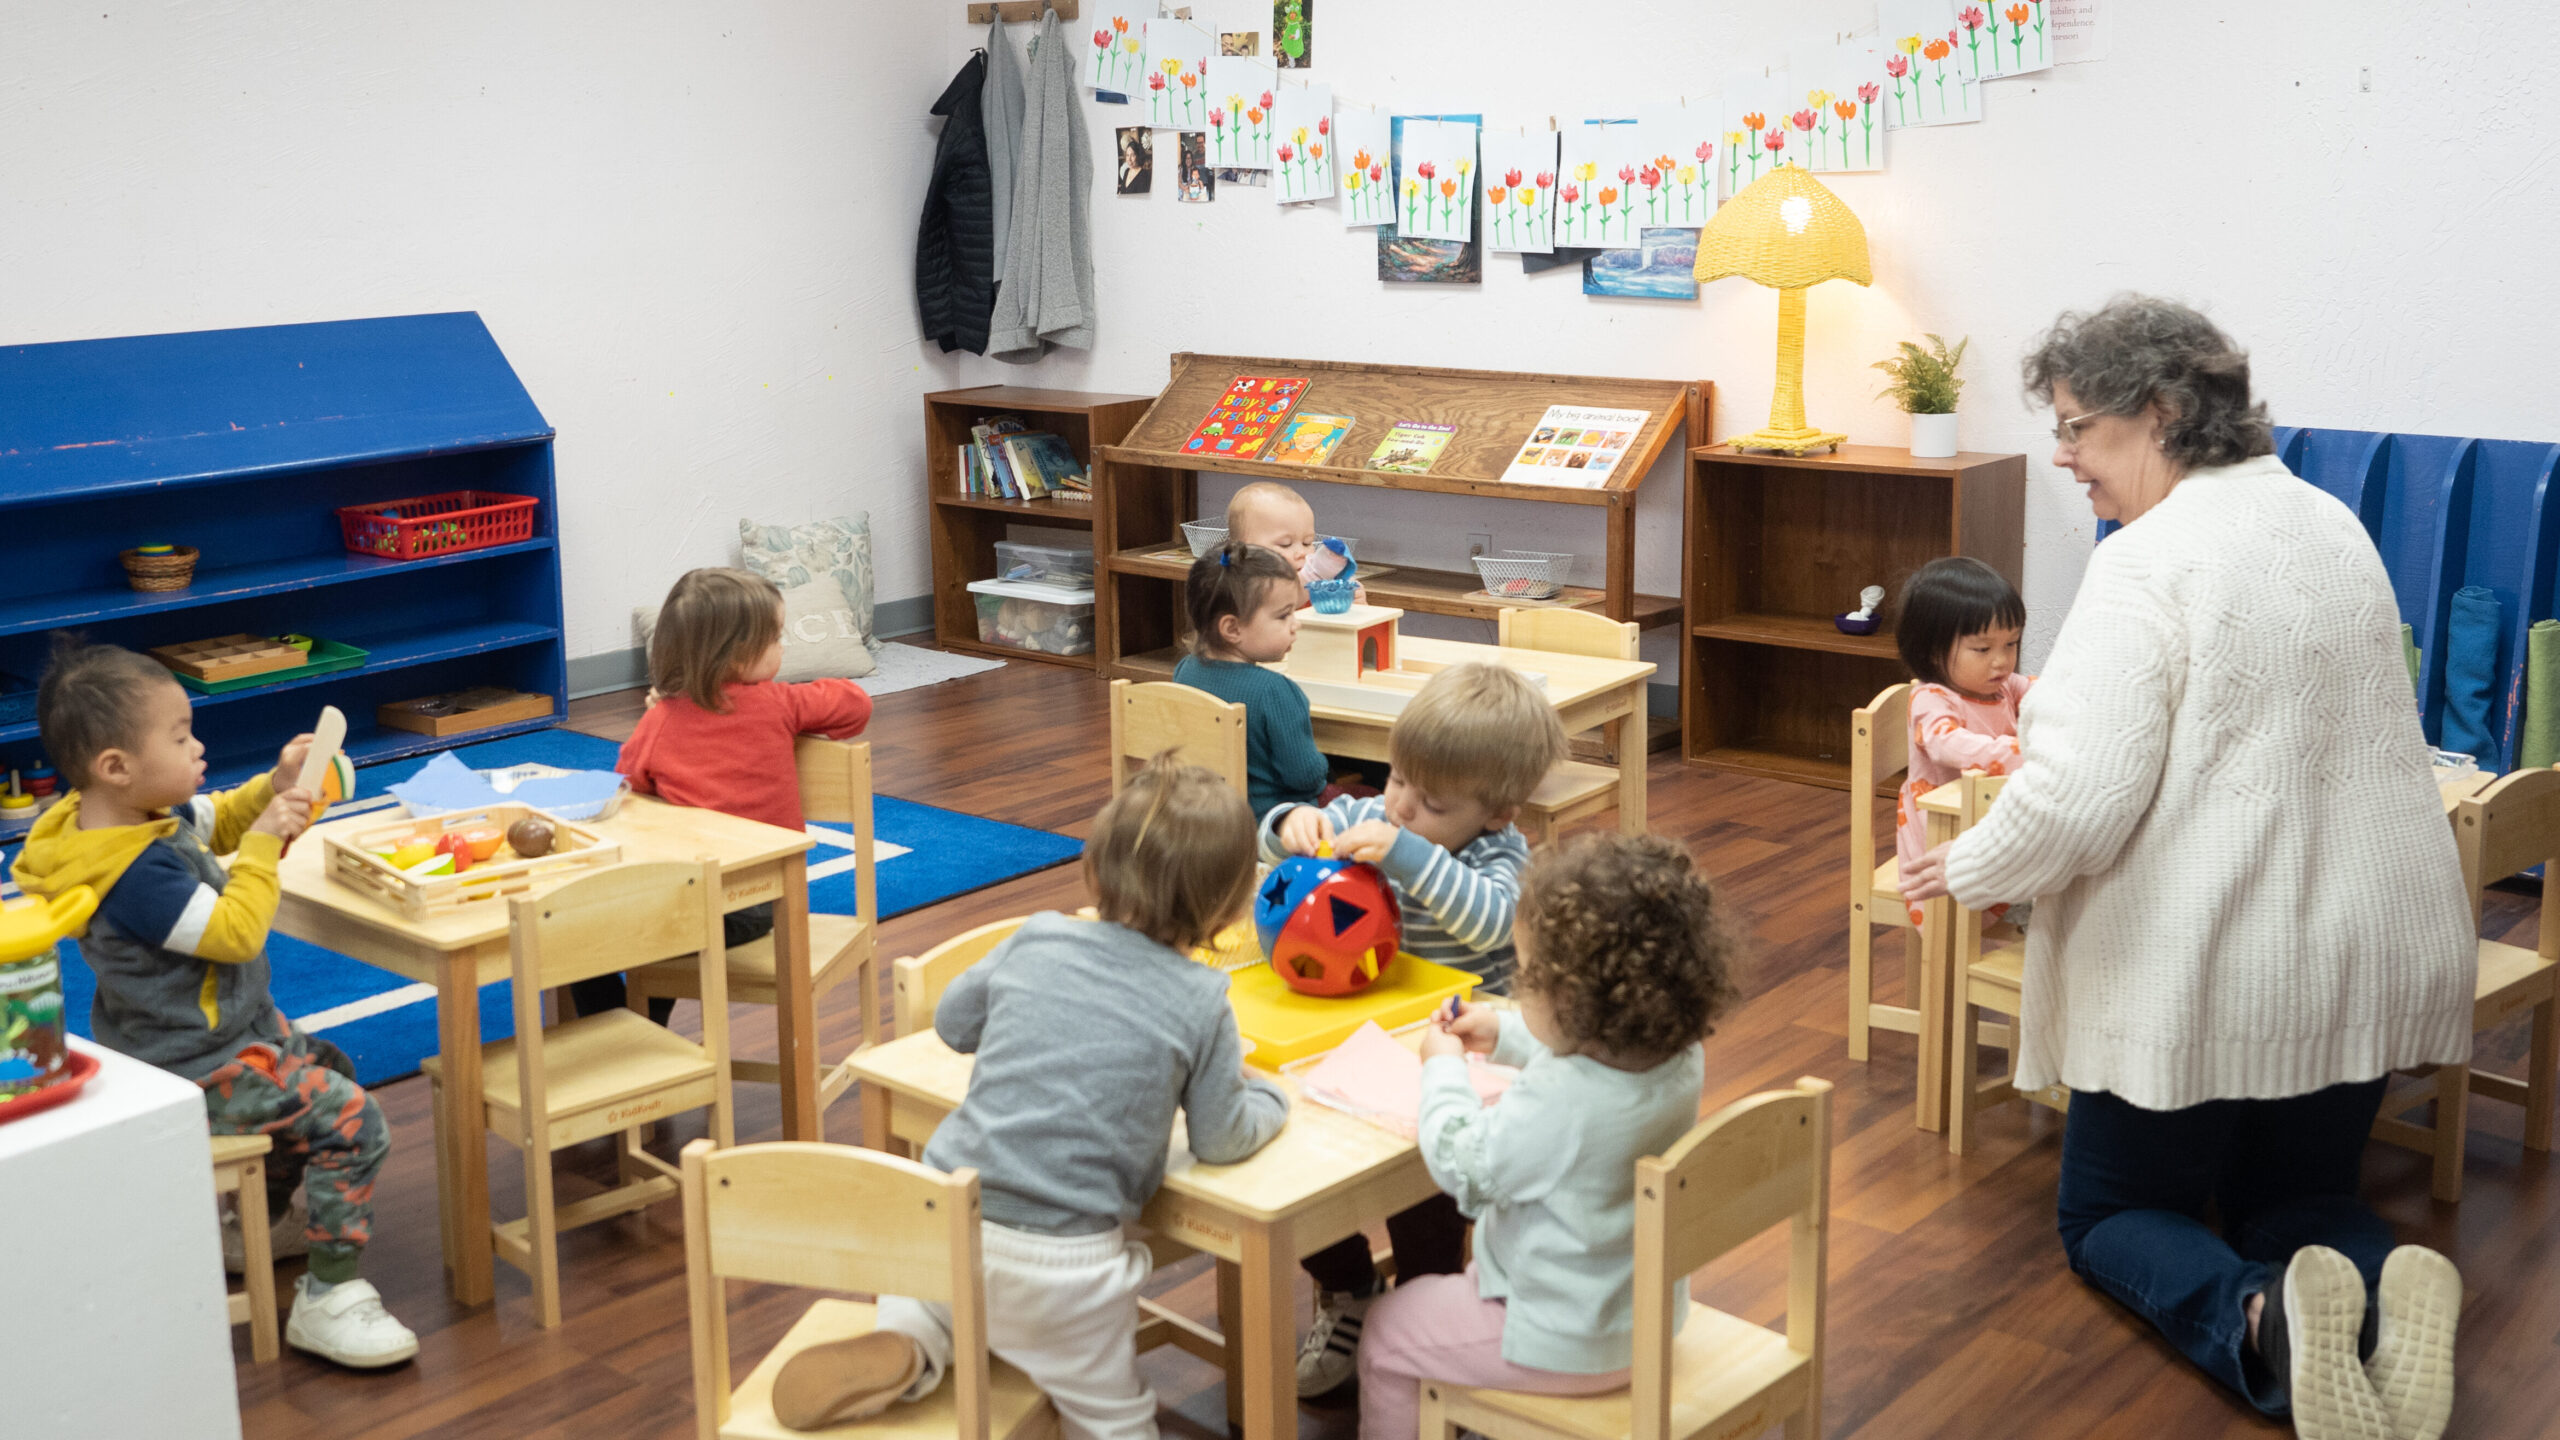 Montessori students learning practical activities in the classroom